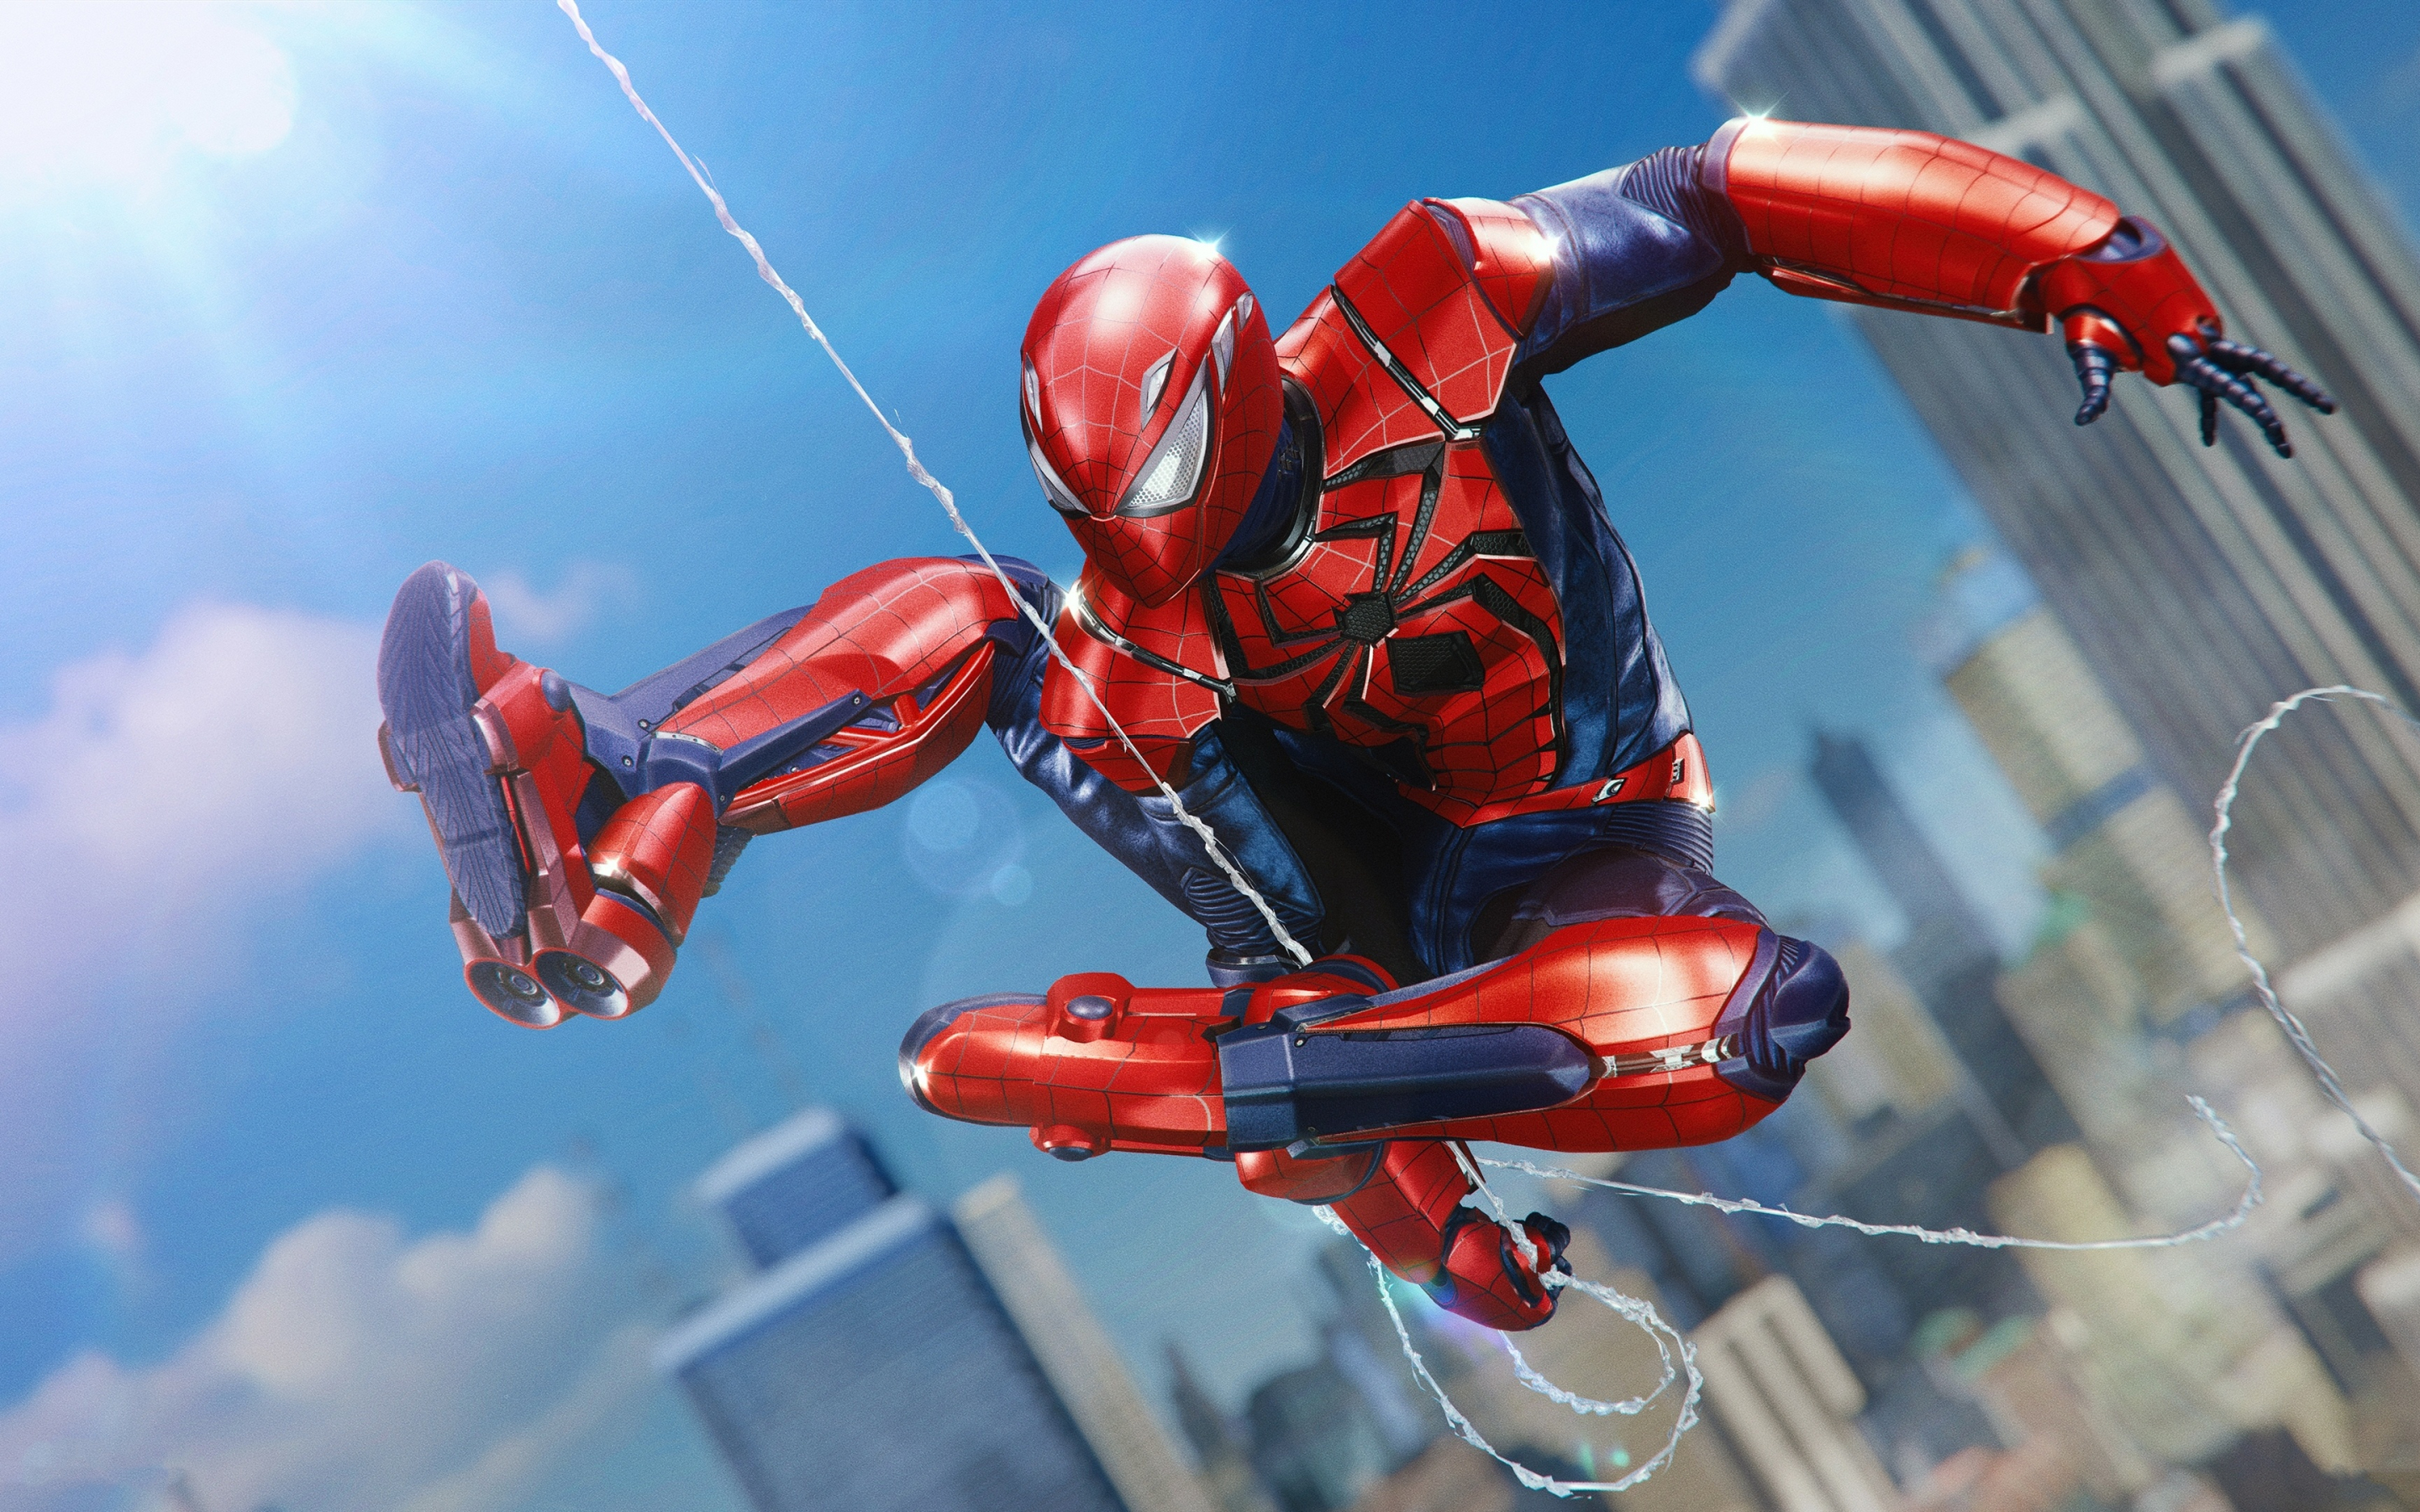 Spider-man, PS4, Aaron Aikman armor, swing, video game, 2880x1800 wallpaper